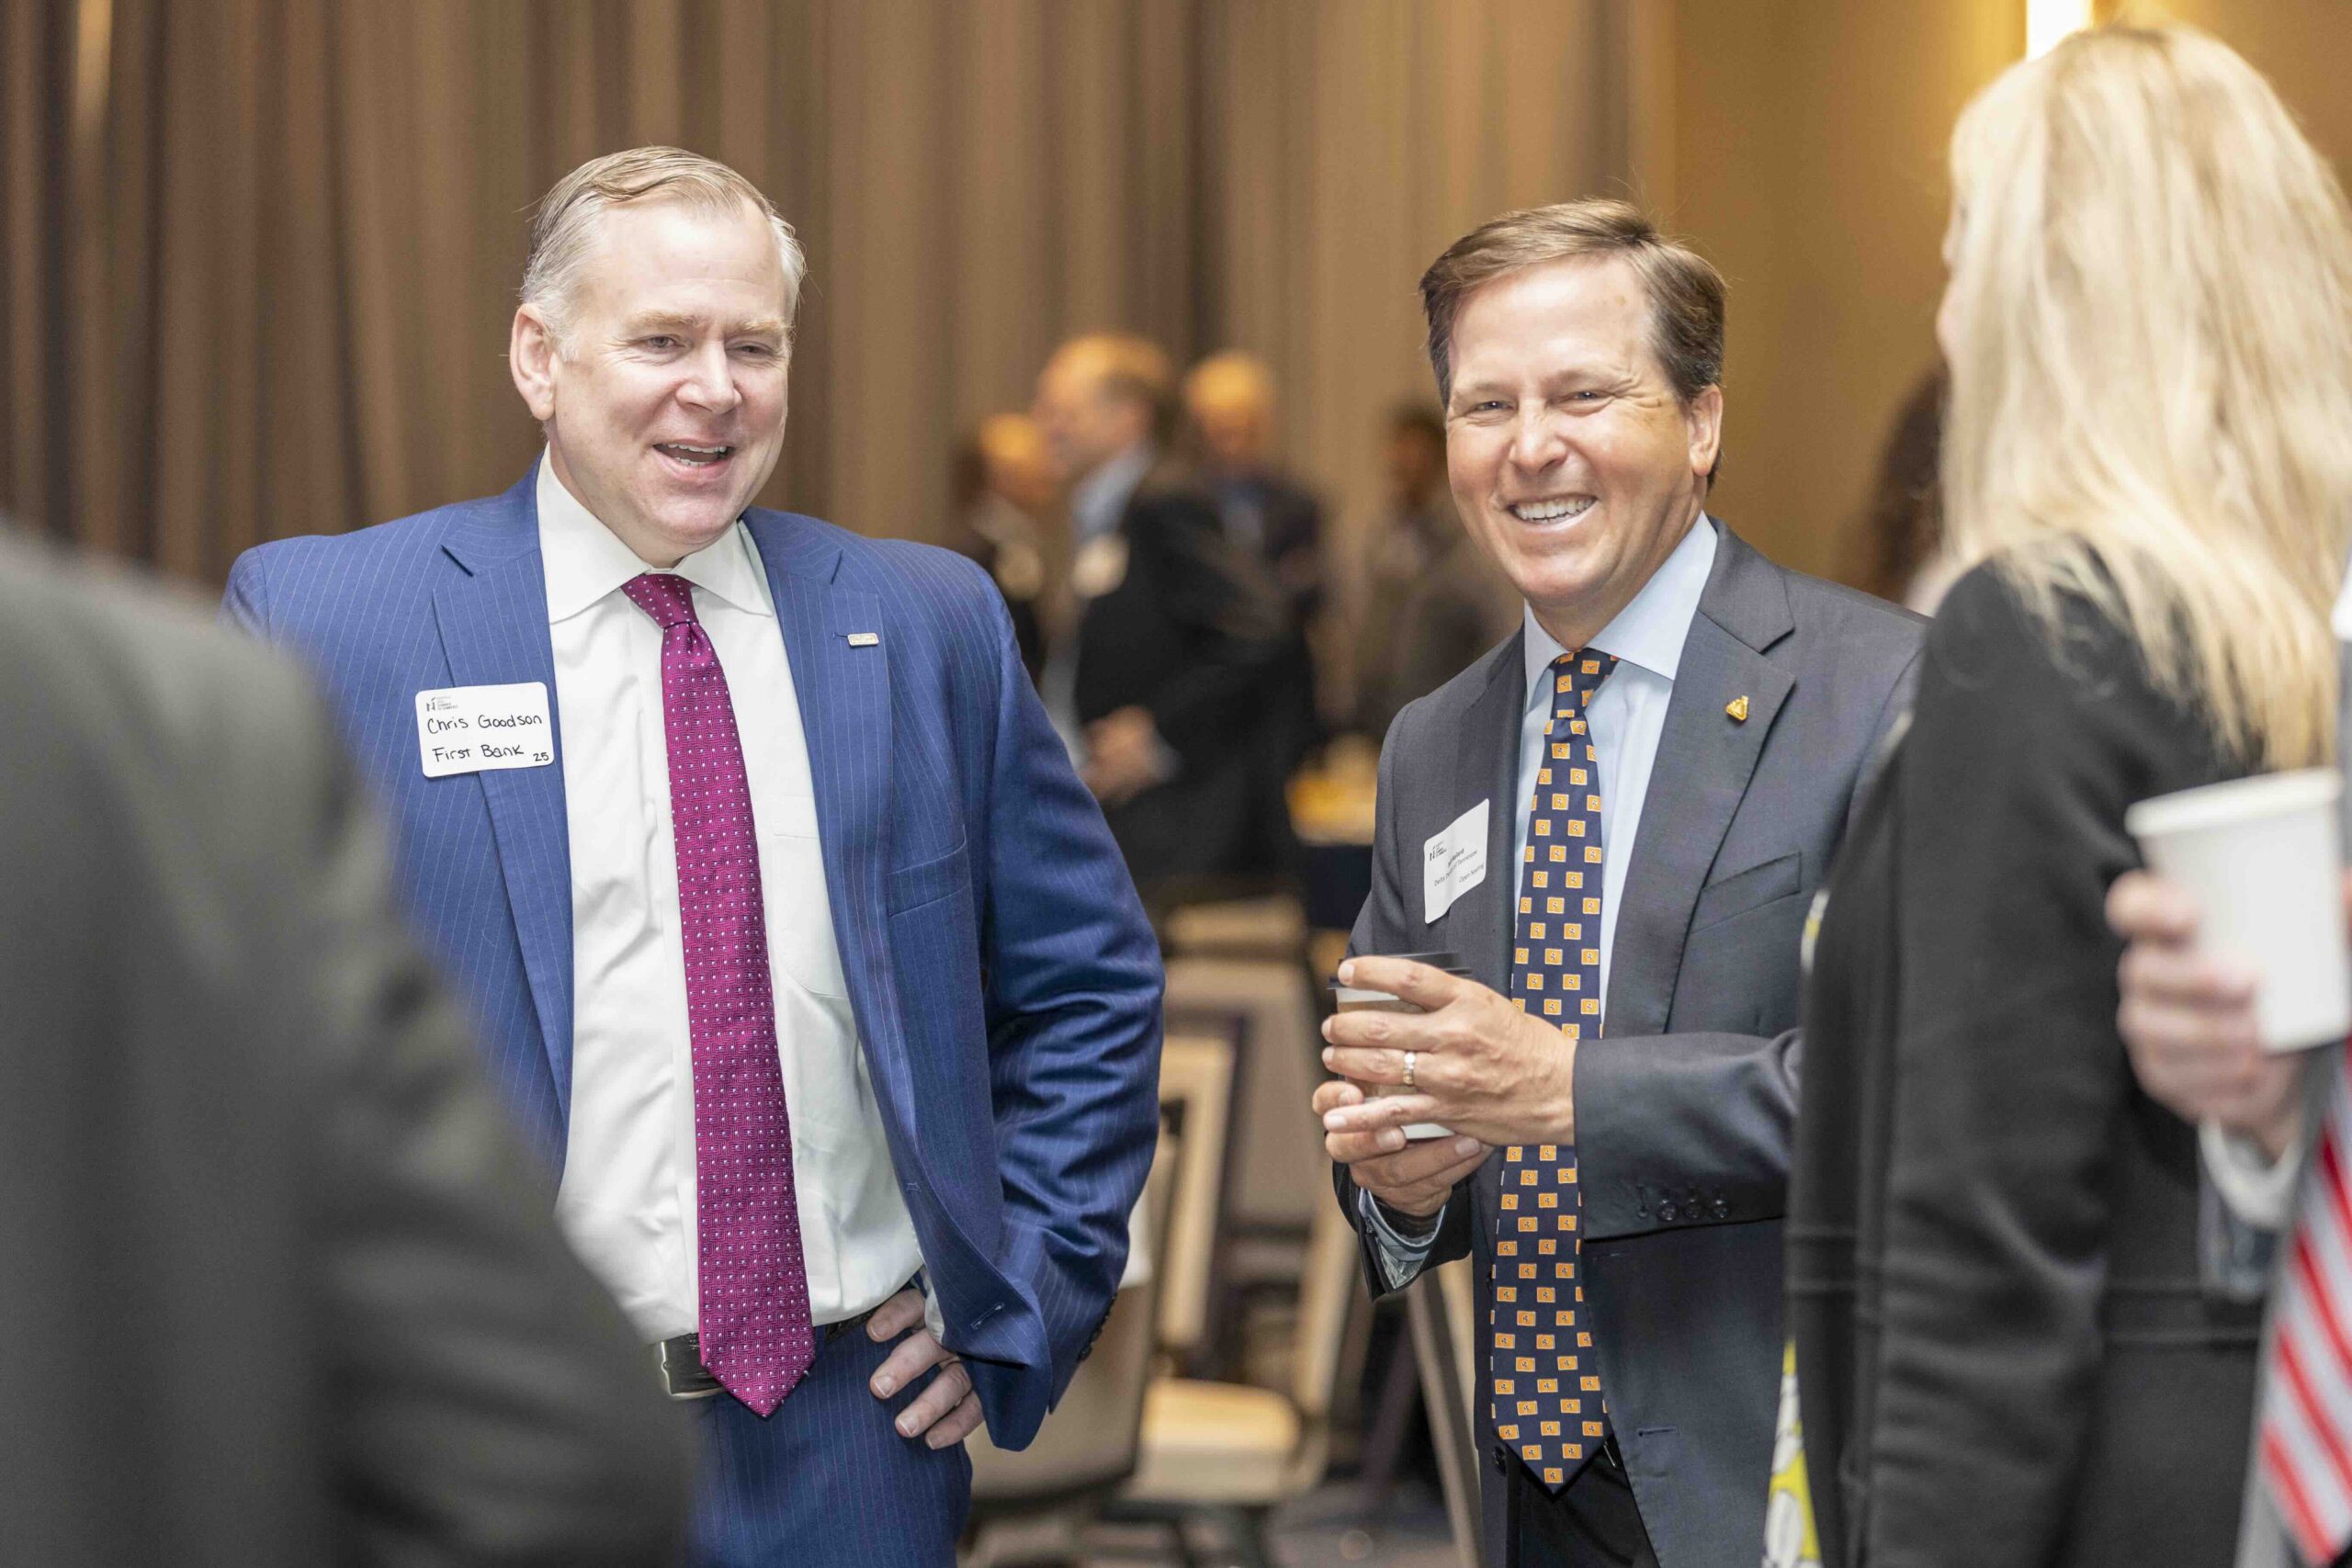 Two professionals engaged in a friendly conversation at a networking event, with others mingling in the background.